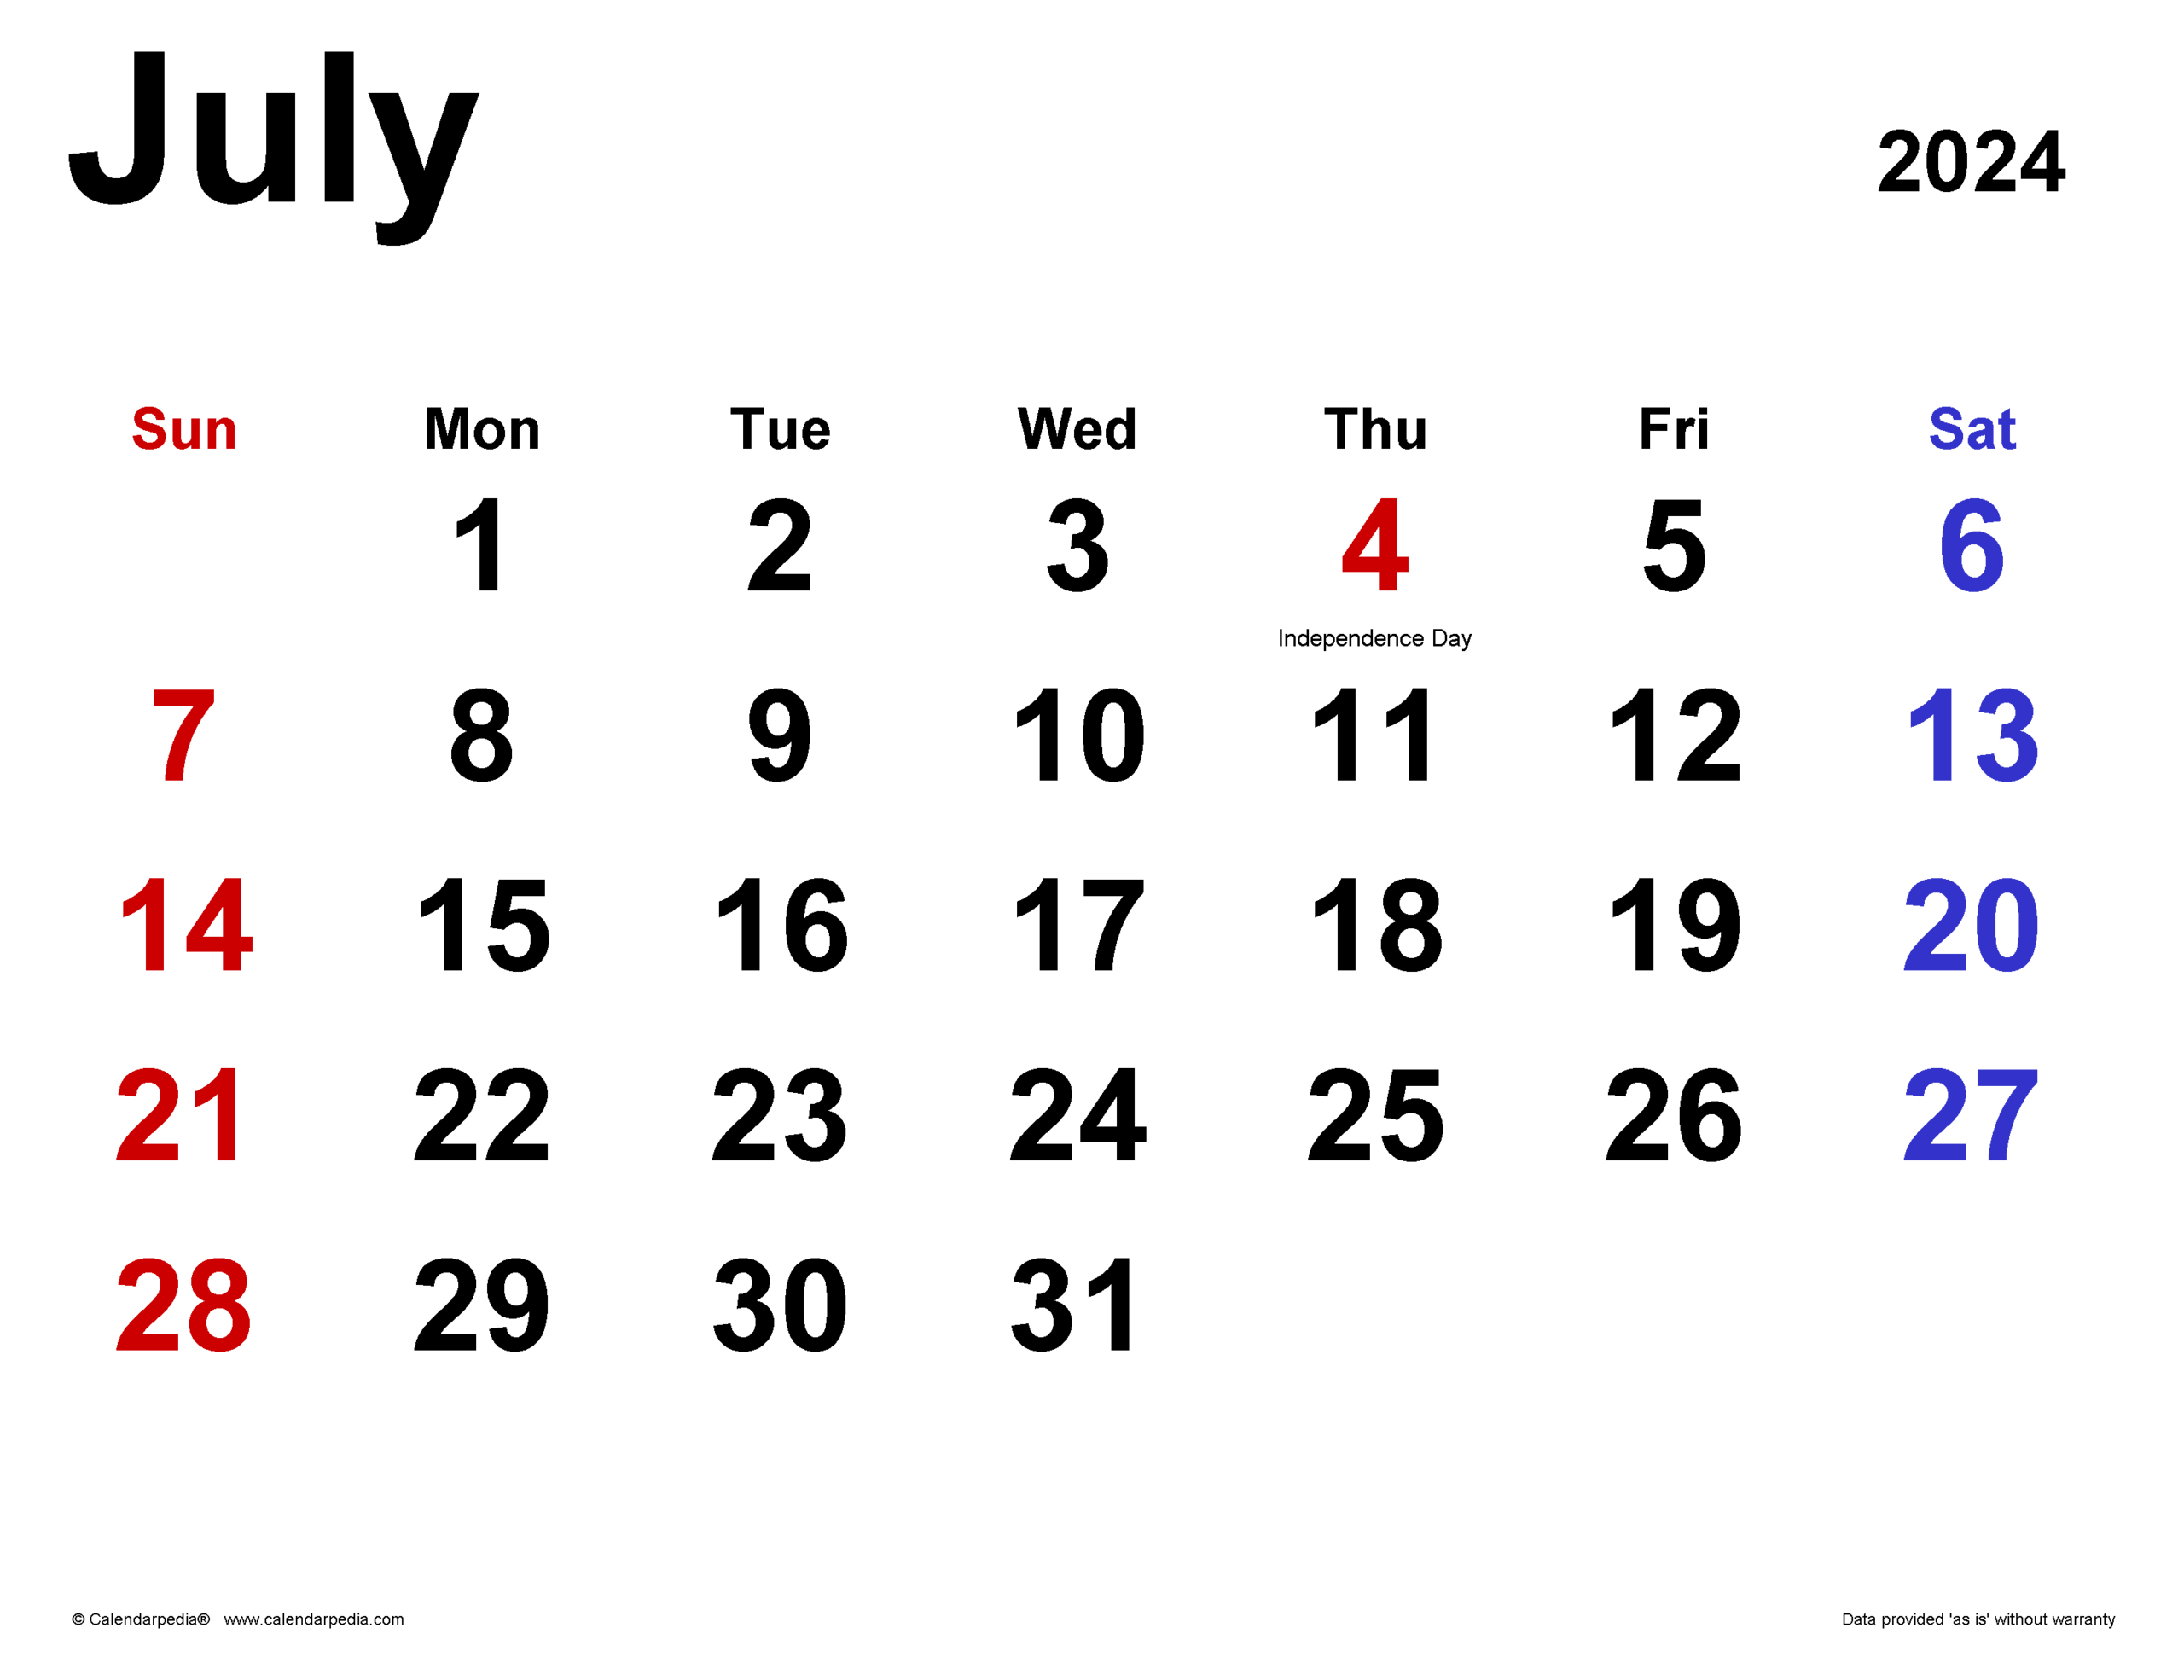 July 2024 Calendar | Templates For Word, Excel And Pdf throughout July 2024 Calendar Days